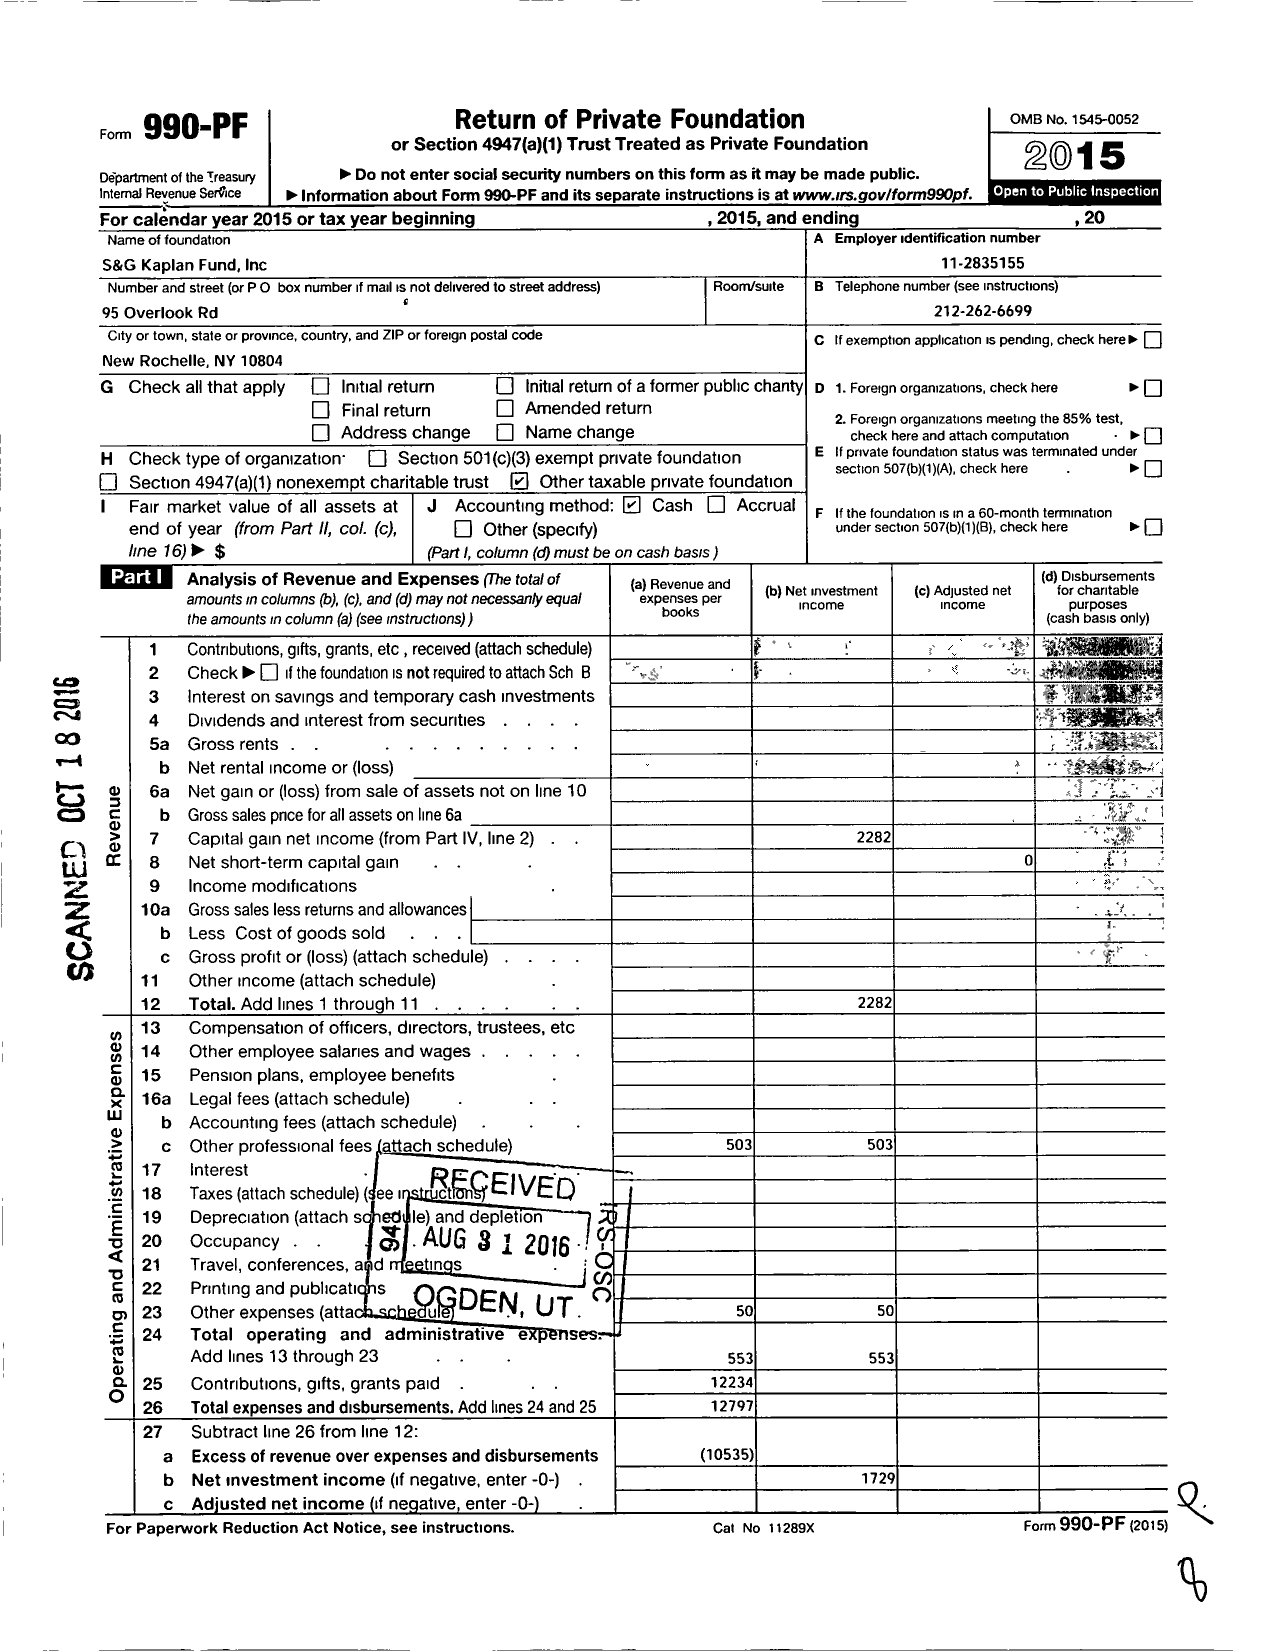 Image of first page of 2015 Form 990PF for S and G Kaplan Fund